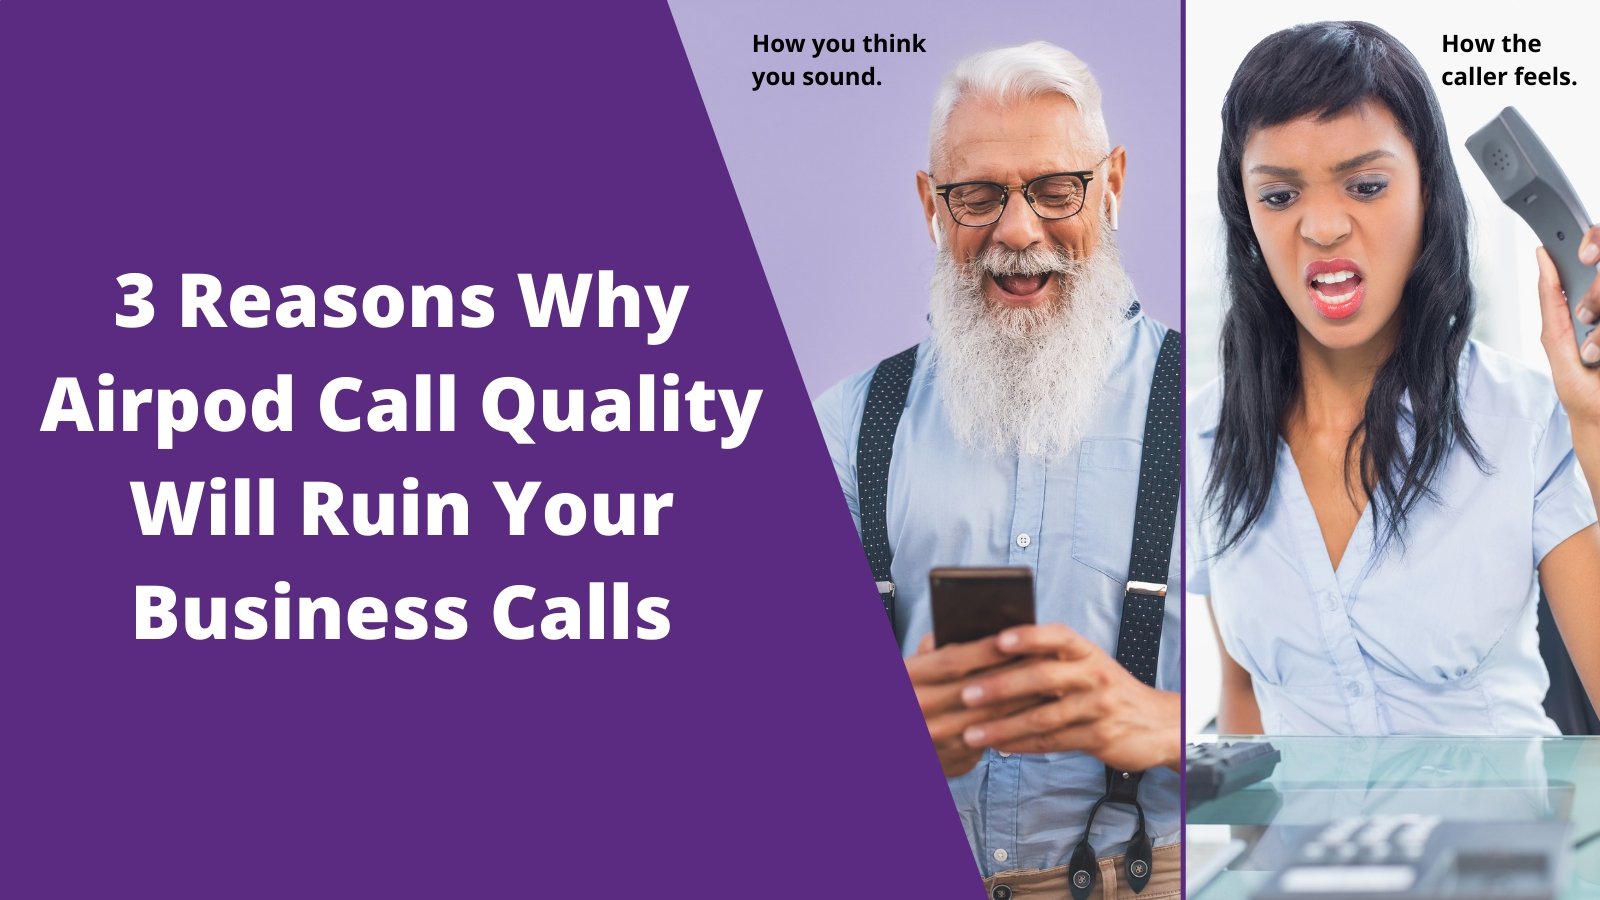 3 Reasons Why Airpod Call Quality Will Ruin Your Business Calls - Headset Advisor